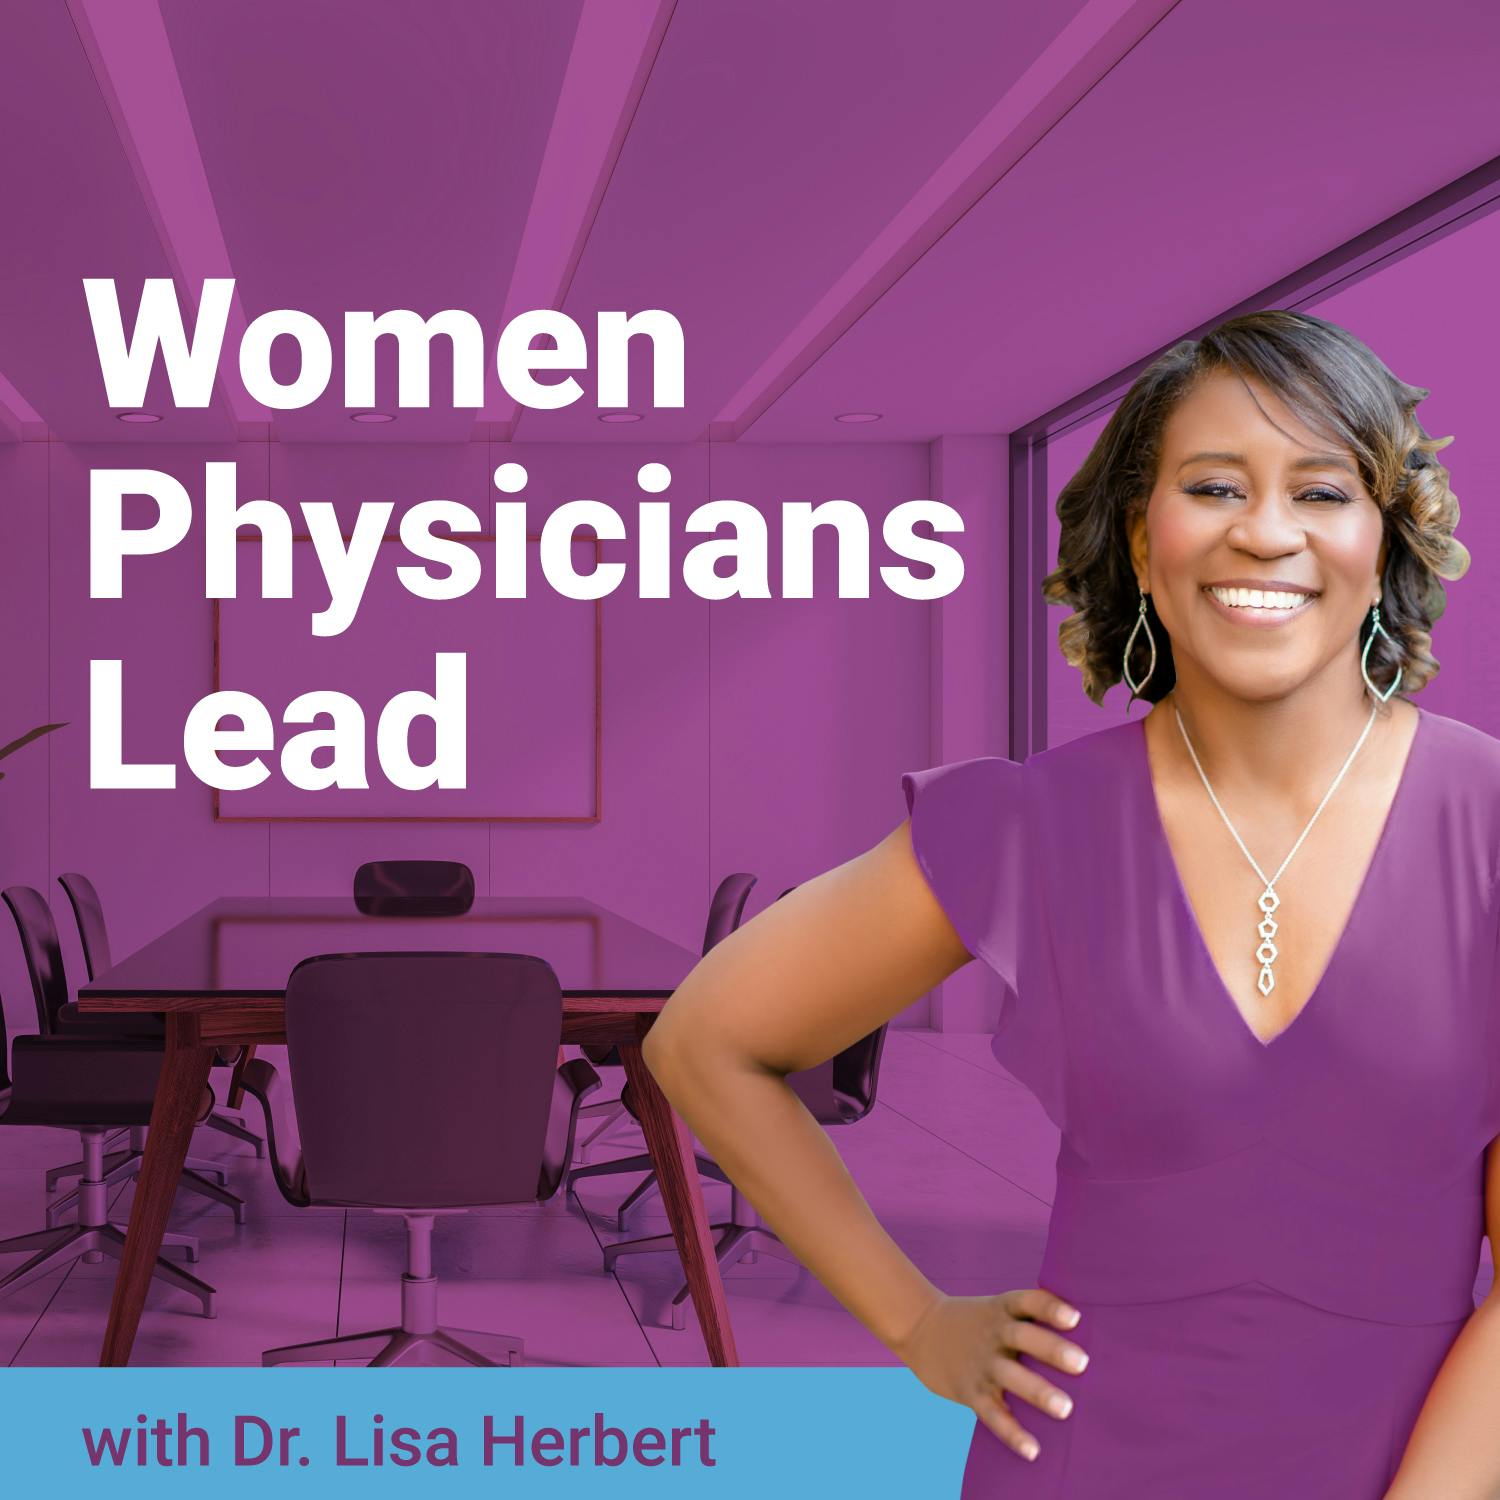 Dr. Denise Johnson Miller: A Surgeon’s Mission To Help Prepare the Next Generation of Female Leaders